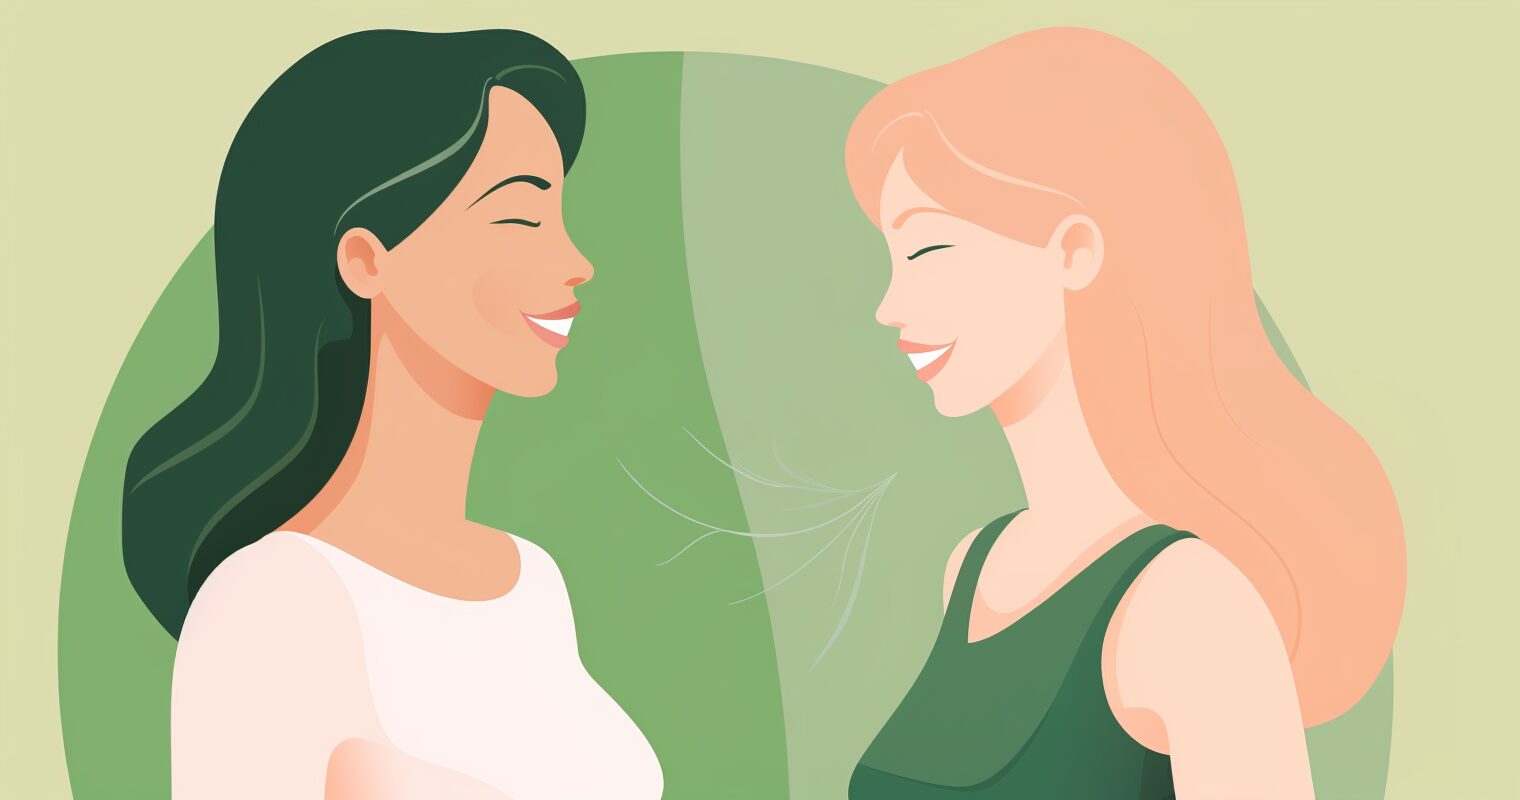 Two women smiling at each other.